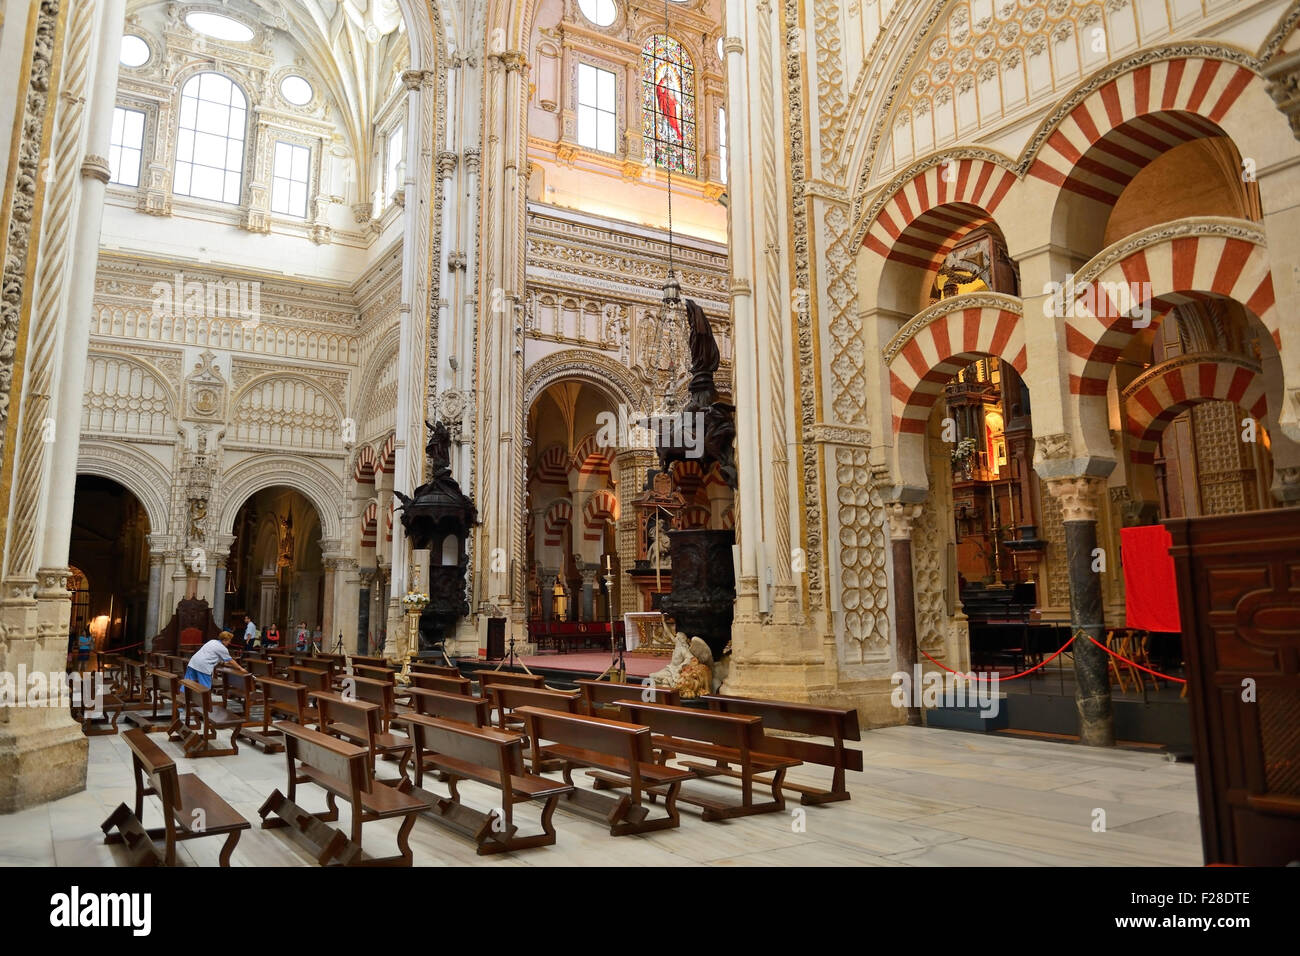 Mezquita Catedral (Moschee-Kathedrale) in Córdoba, Andalusien, Spanien Stockfoto